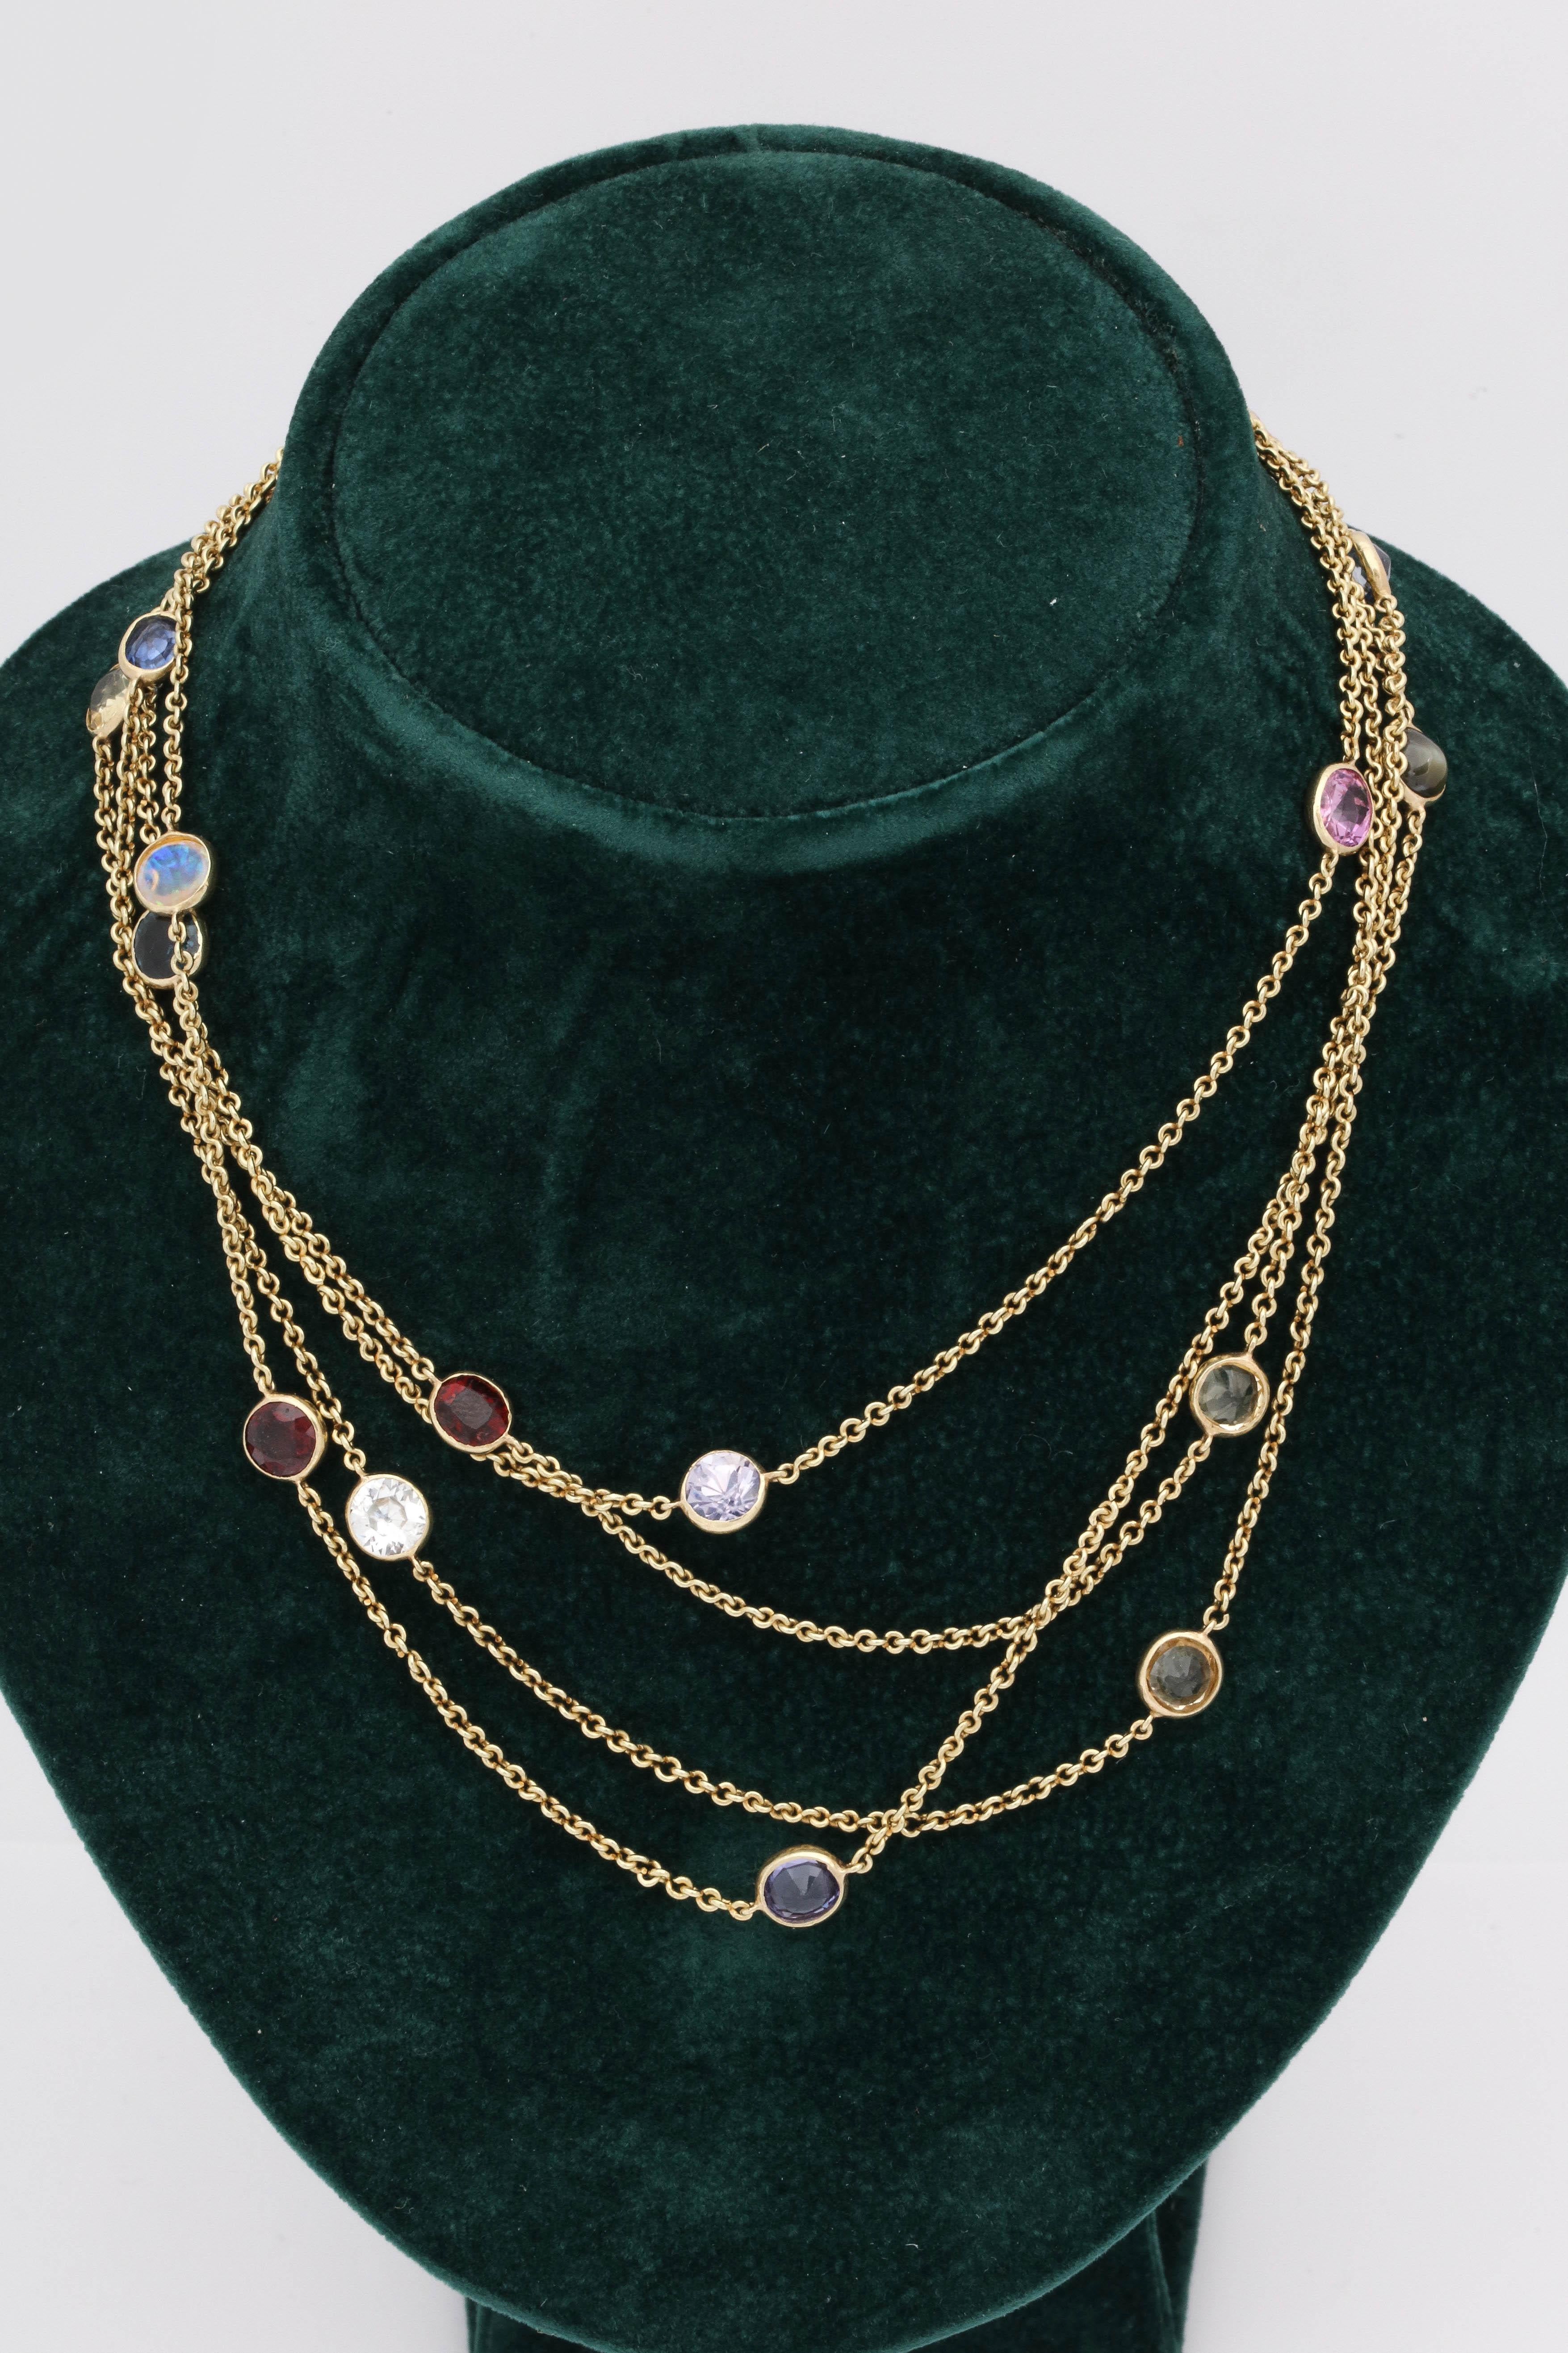 One Ladies 18kt Gold Long Link Chain Necklace Embellished With Nineteen Bezel Set Stones Composed Of Pink,Blue And Yellow Sapphires. Also Created With Rubies,Opals And Green Tourmaline And Pink Kunzite Stones Thruout.Made In The United States Of